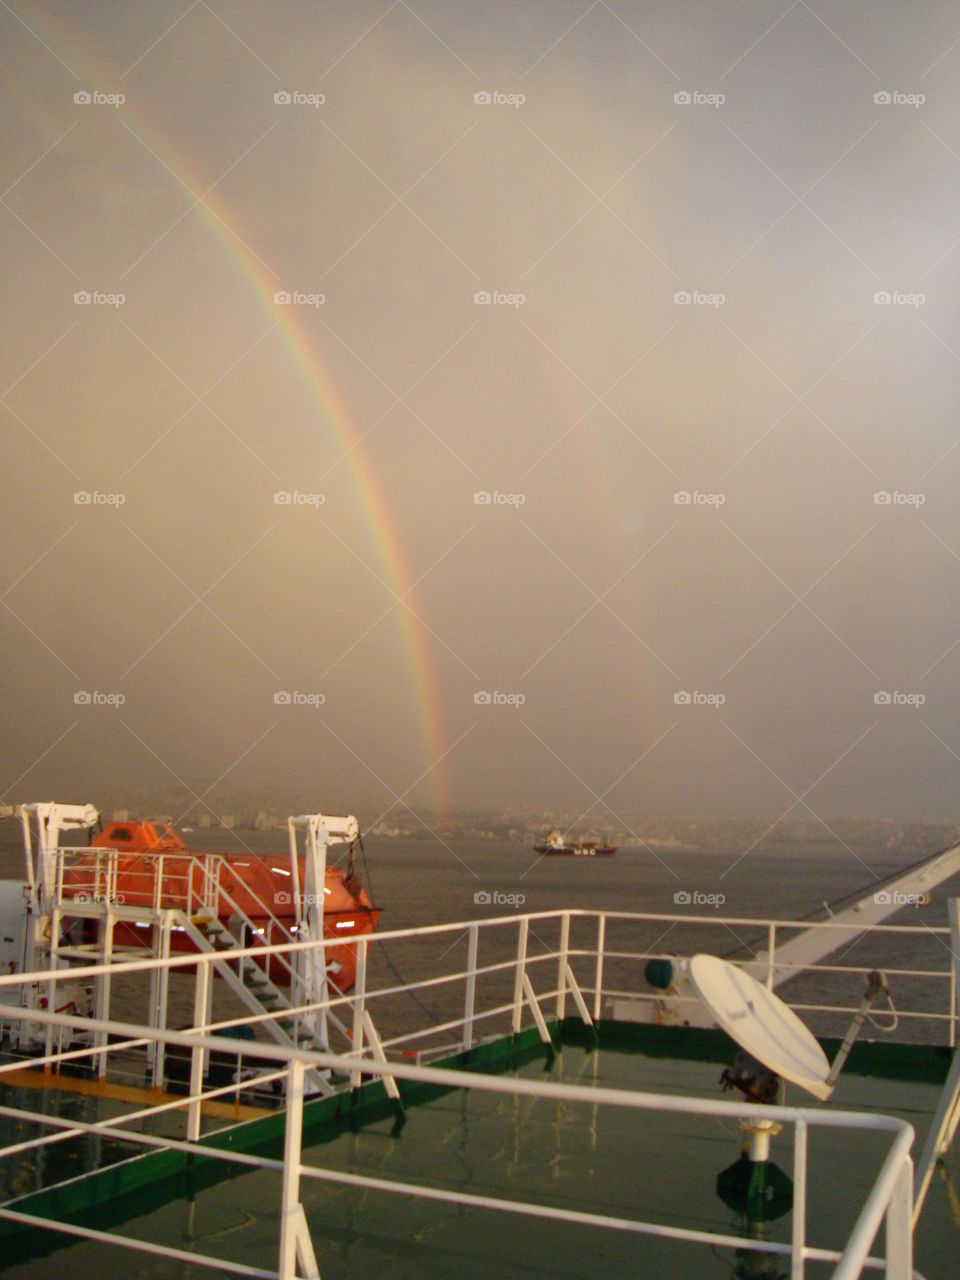 # Ship# Rainbow# Awesome# ship's weather deck# Grimaldi lines# Clear sky# seven colours#